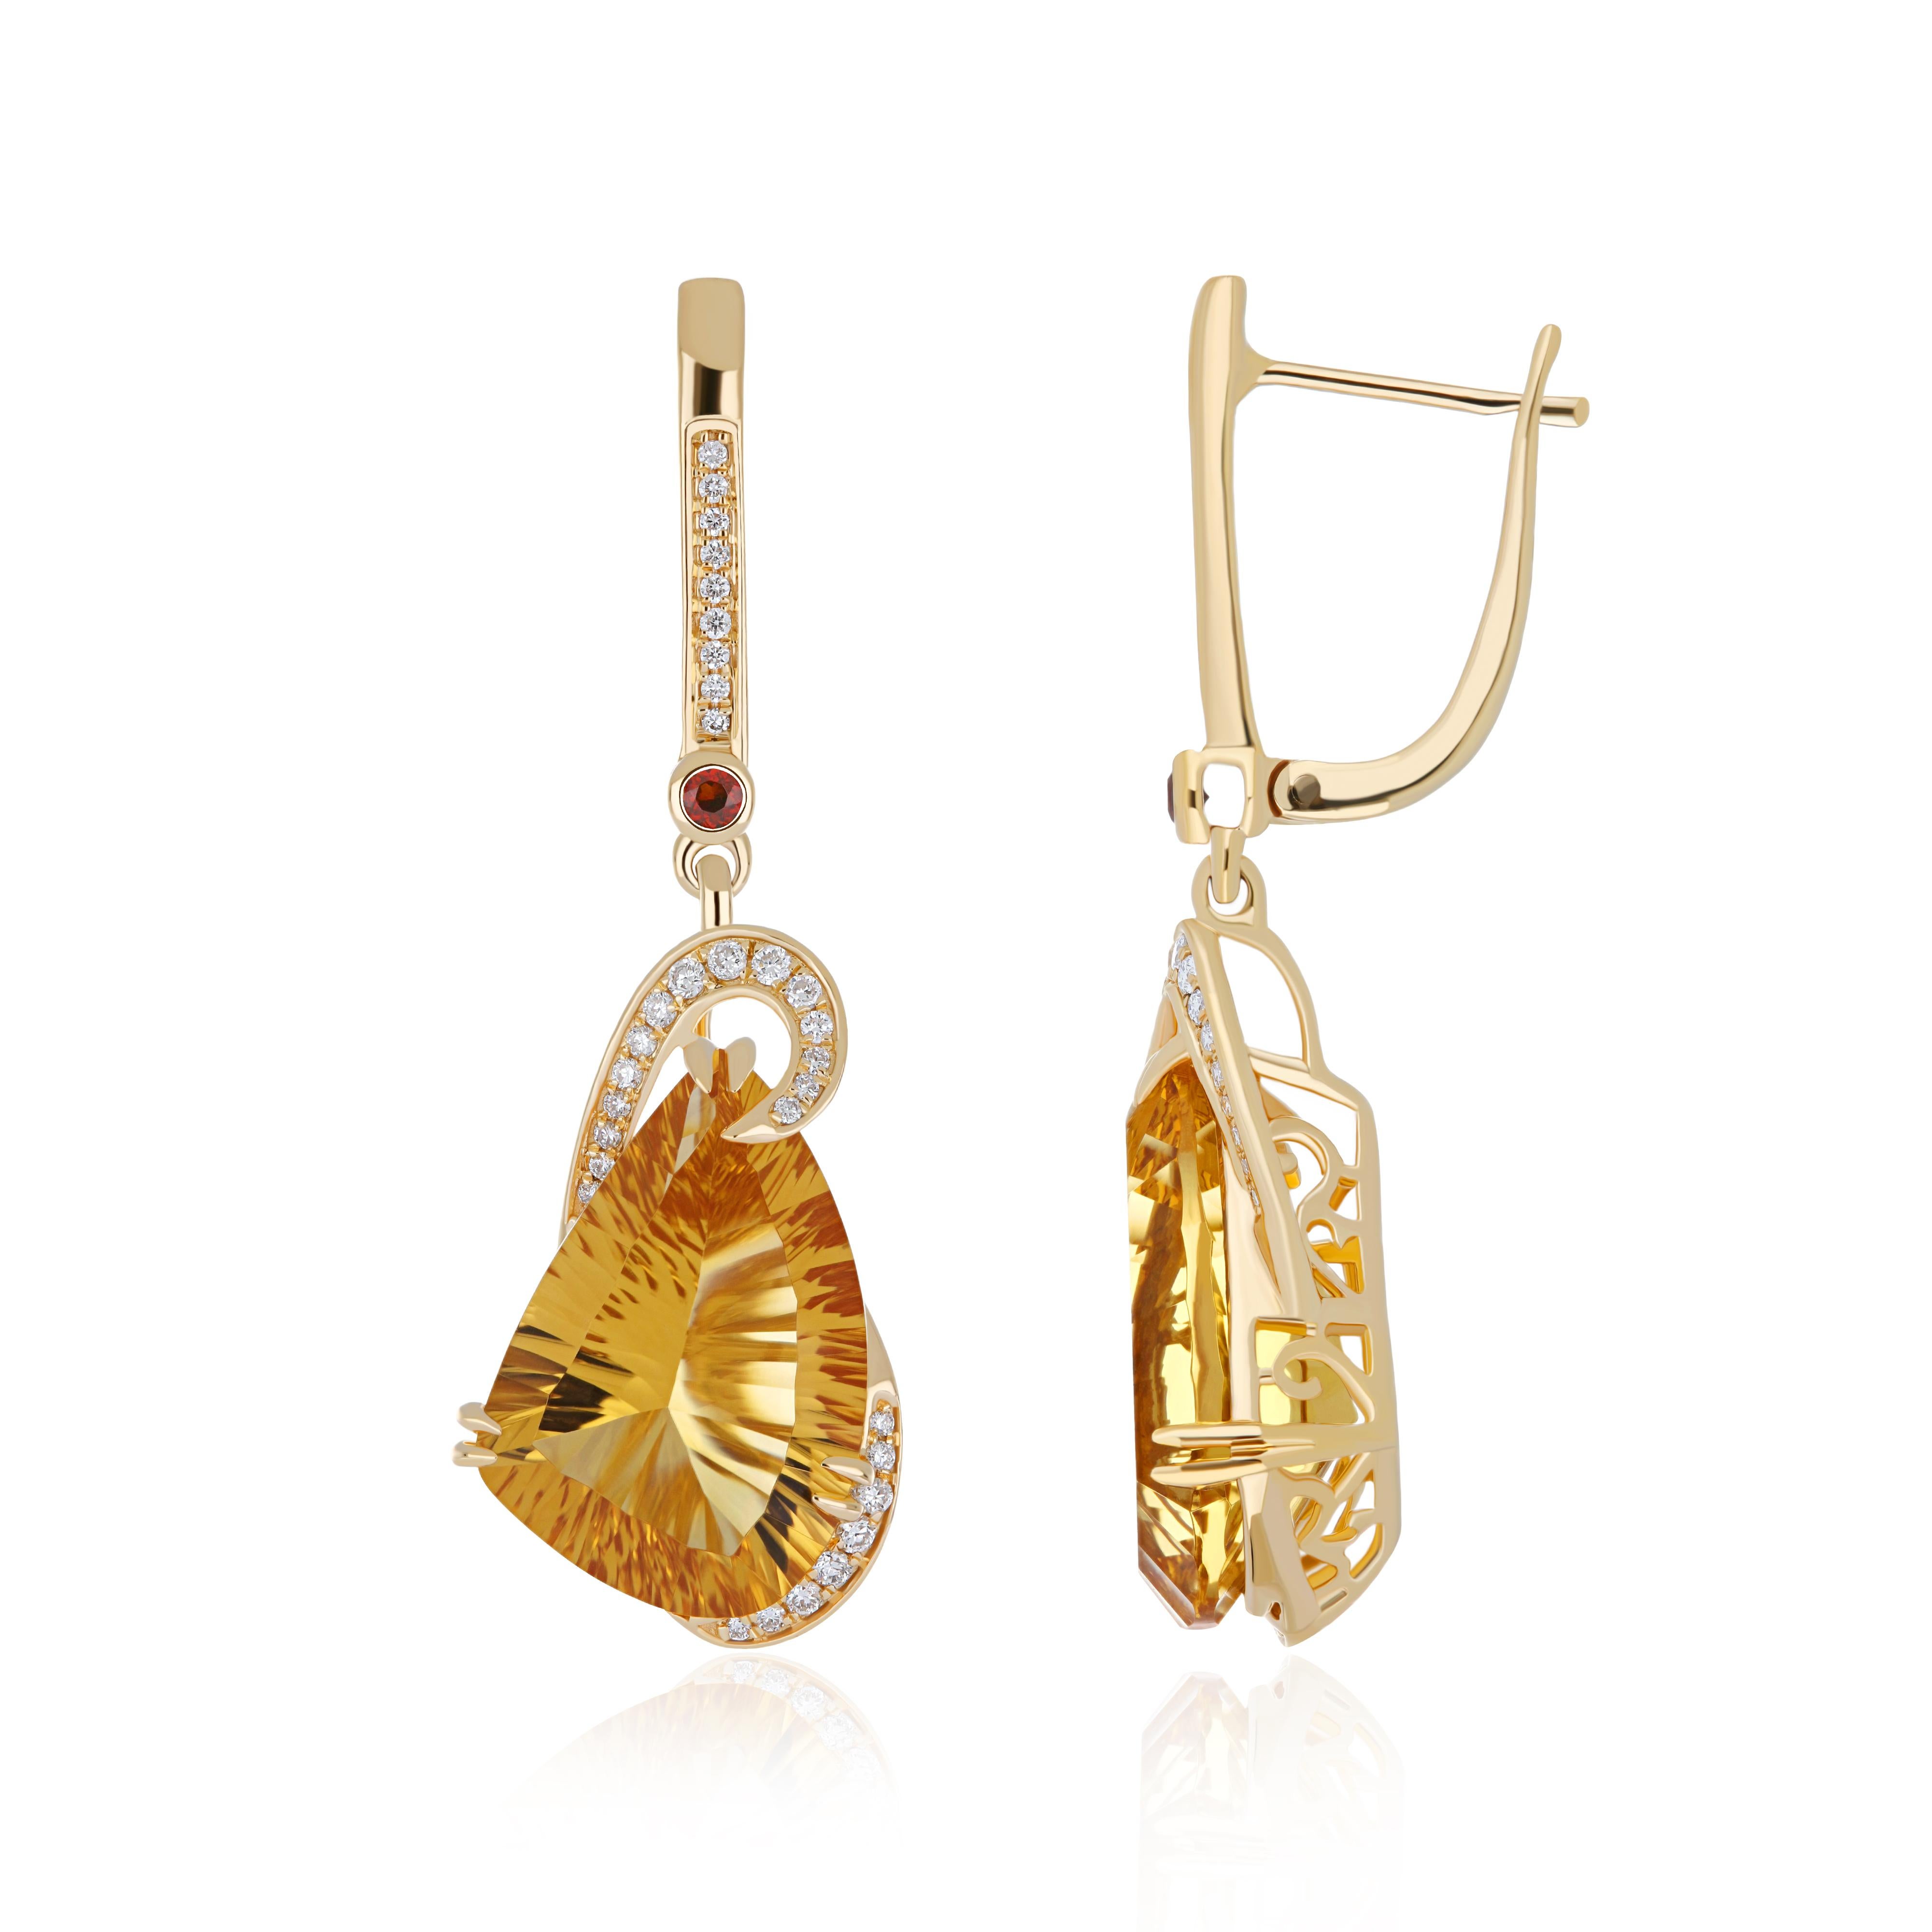 Elegant and Exquisitely Detailed Yellow Gold Earring set with Fancy Shape Citrine weighing approx. 14.20Cts (Total) and Garnet Round Shape weighing approx. 0.09 and with micro prove set Diamonds weighing approx. 0.28Cts Beautifully Hand Crafted in